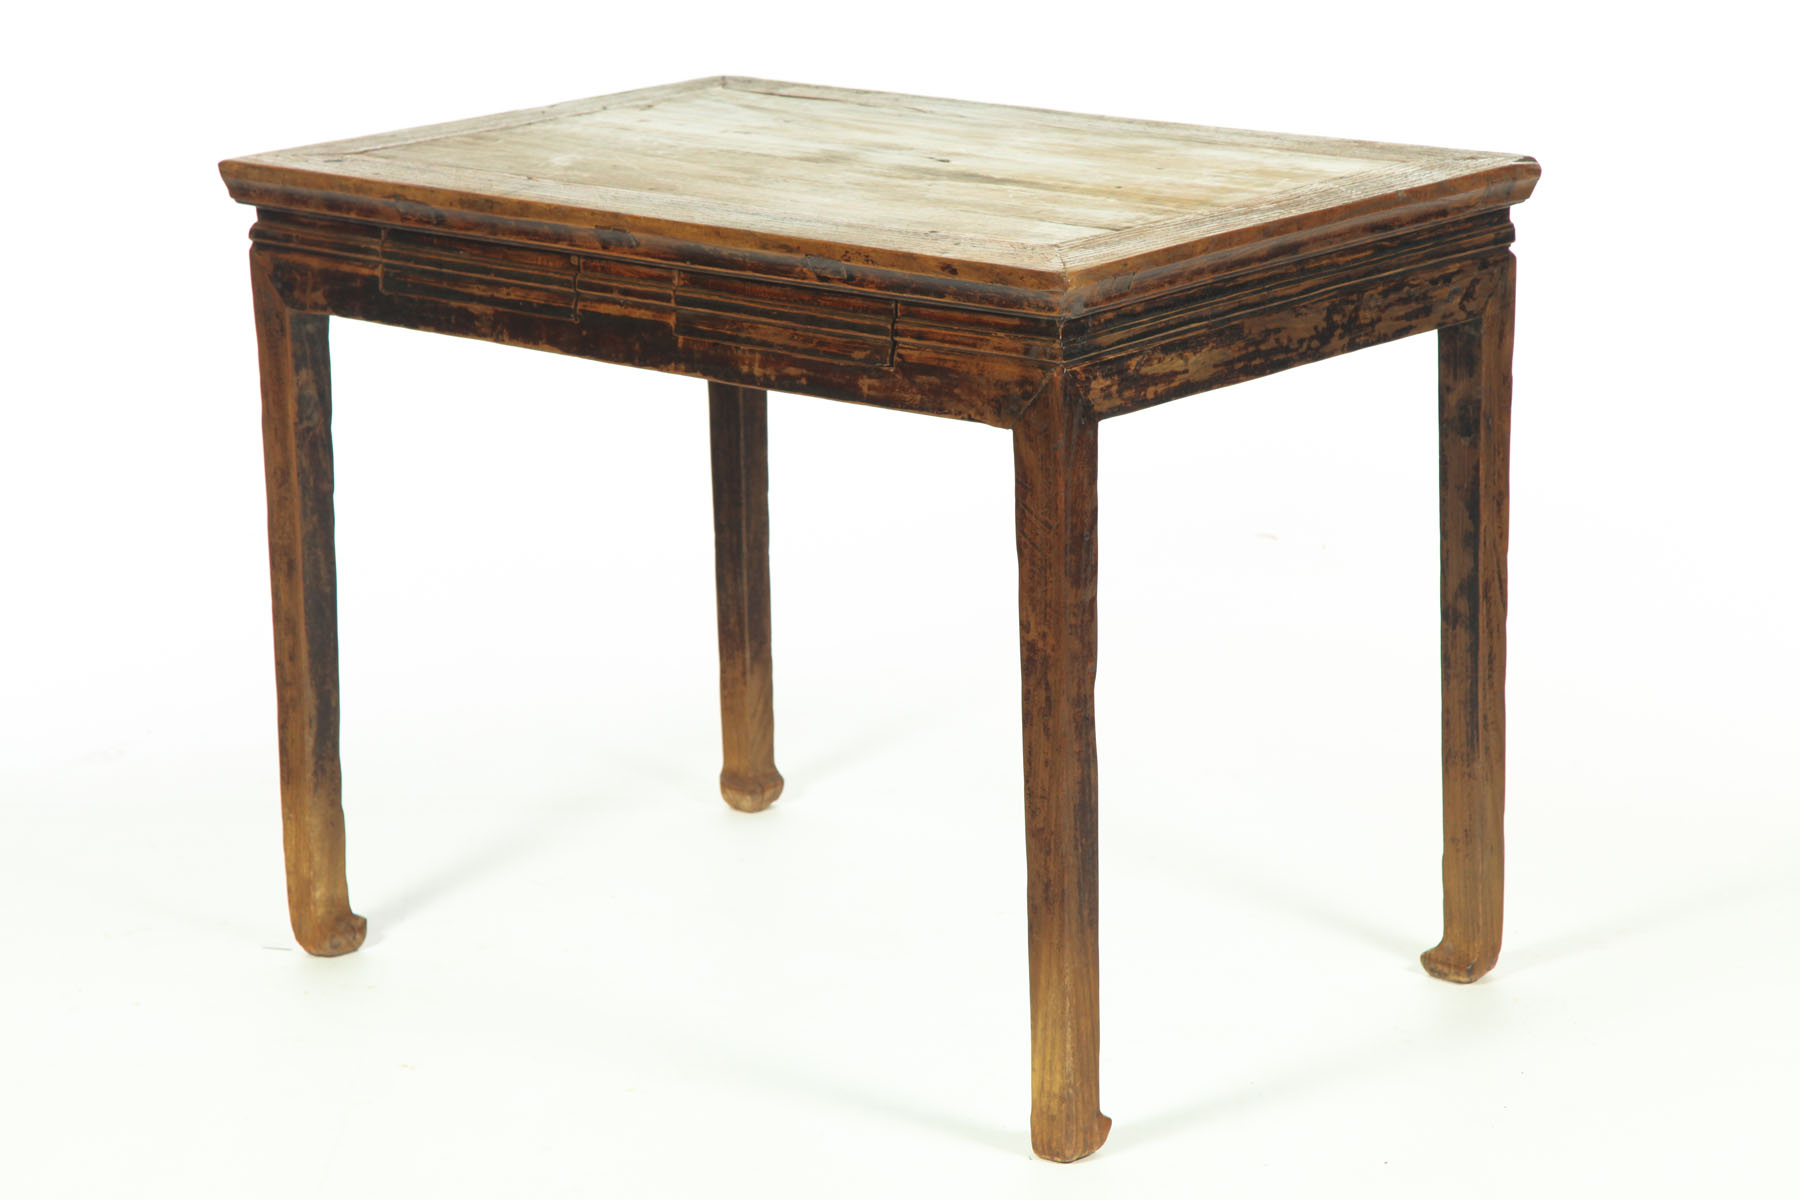 WRITING TABLE.  China  late 19th